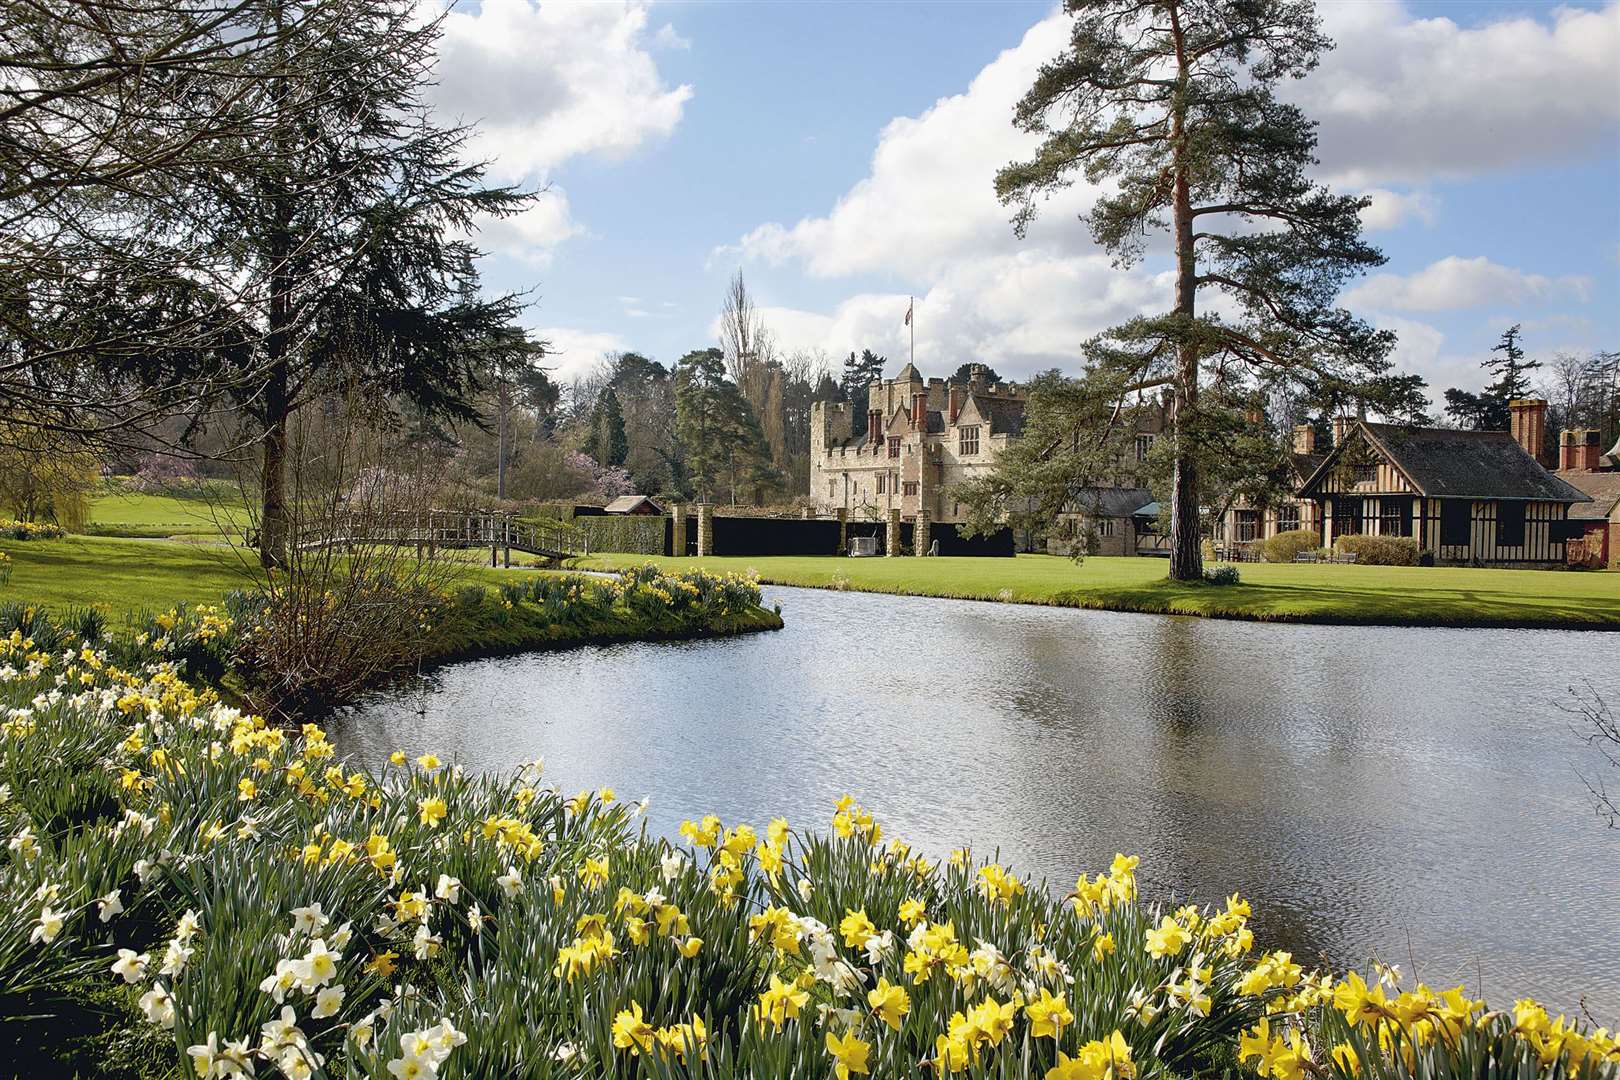 70,000 daffodils have been planted this year. Picture: Hever Castle and Gardens